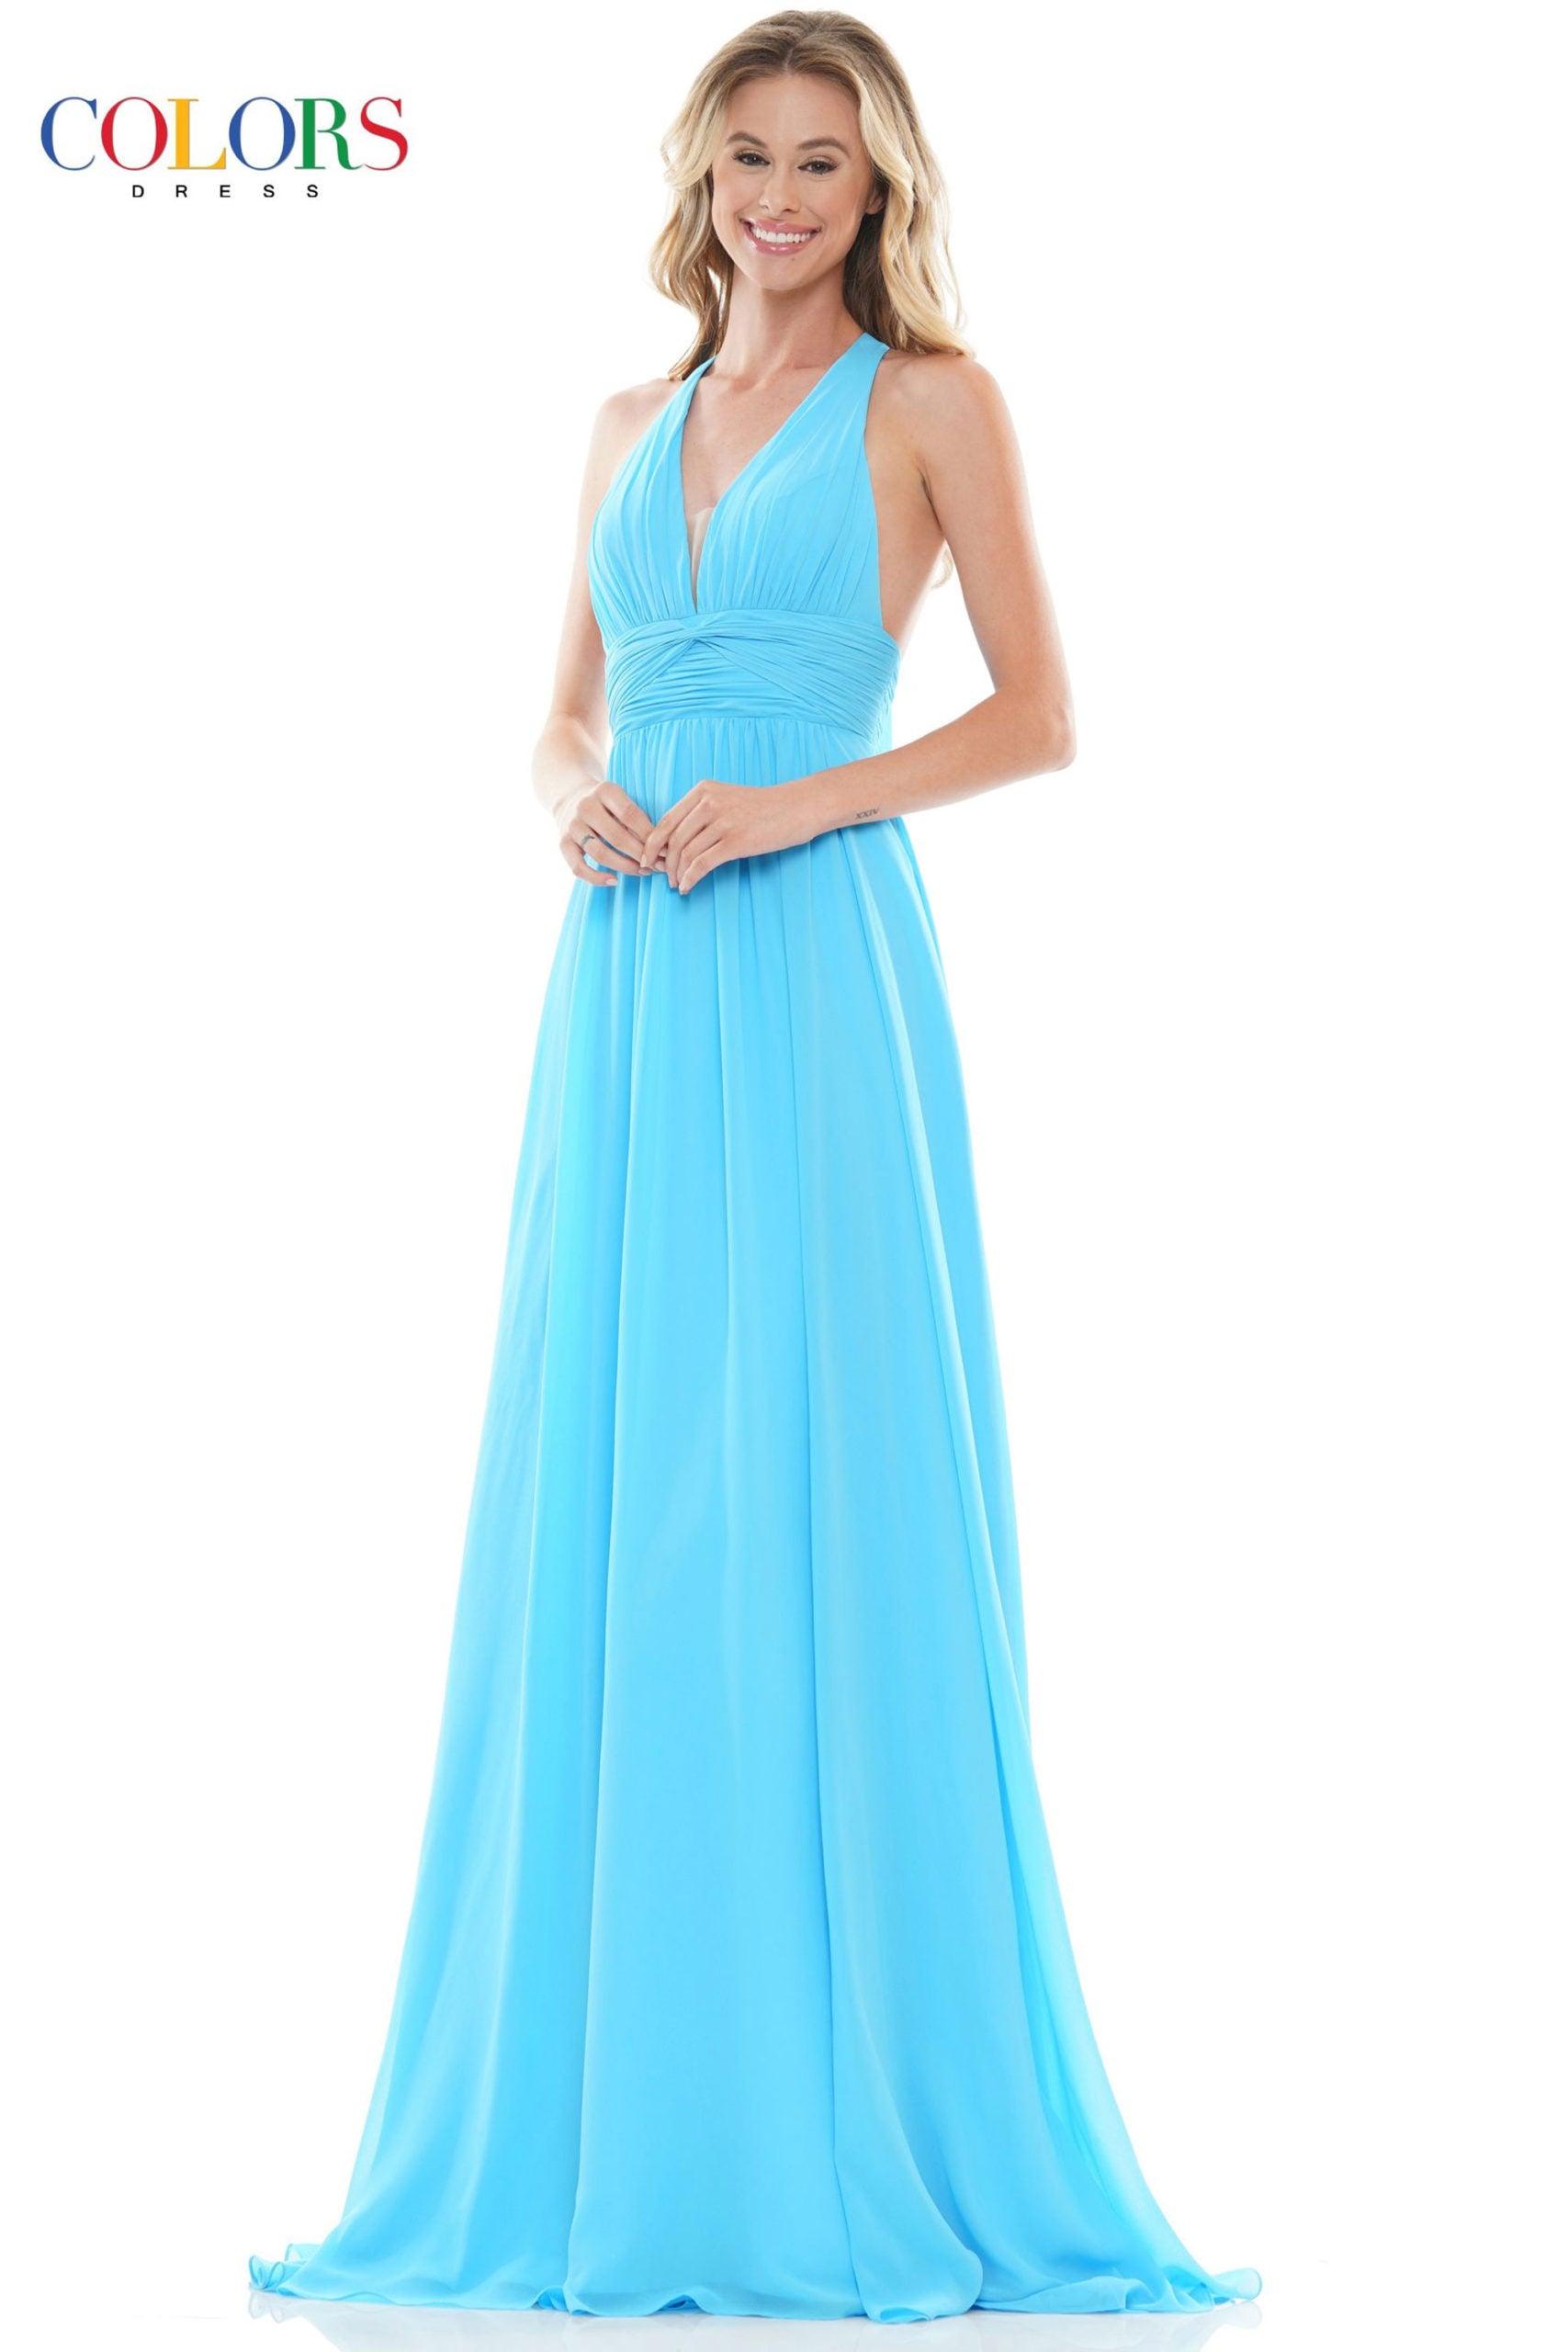 Colors Prom Long Halter Chiffon Formal Dress 2734 - The Dress Outlet